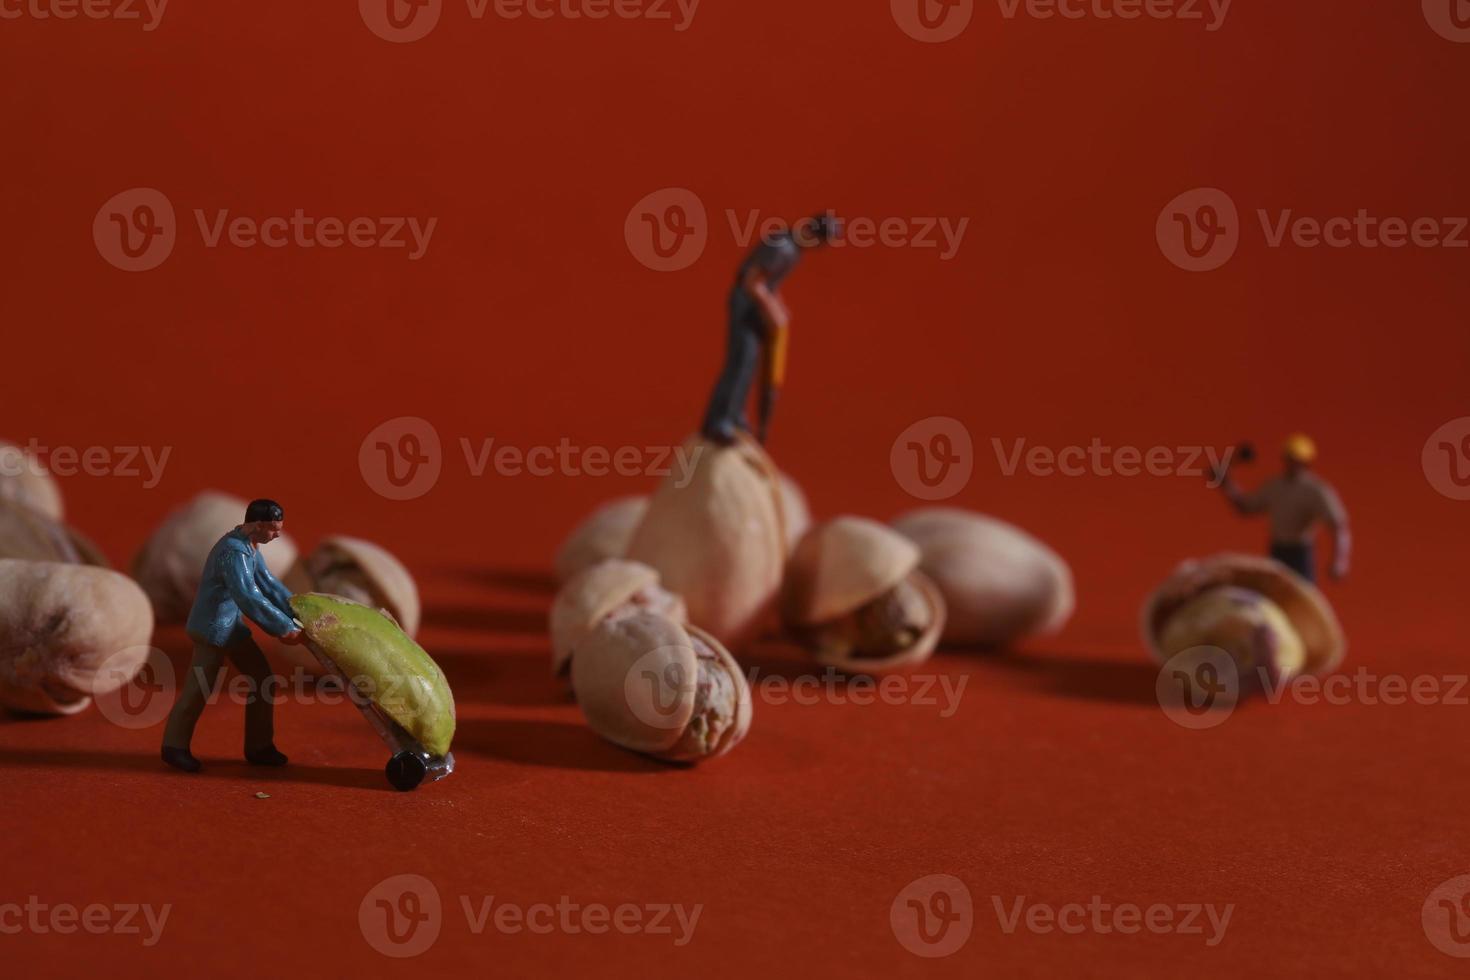 Construction Workers in Conceptual Food Imagery With Pistachio Nuts photo